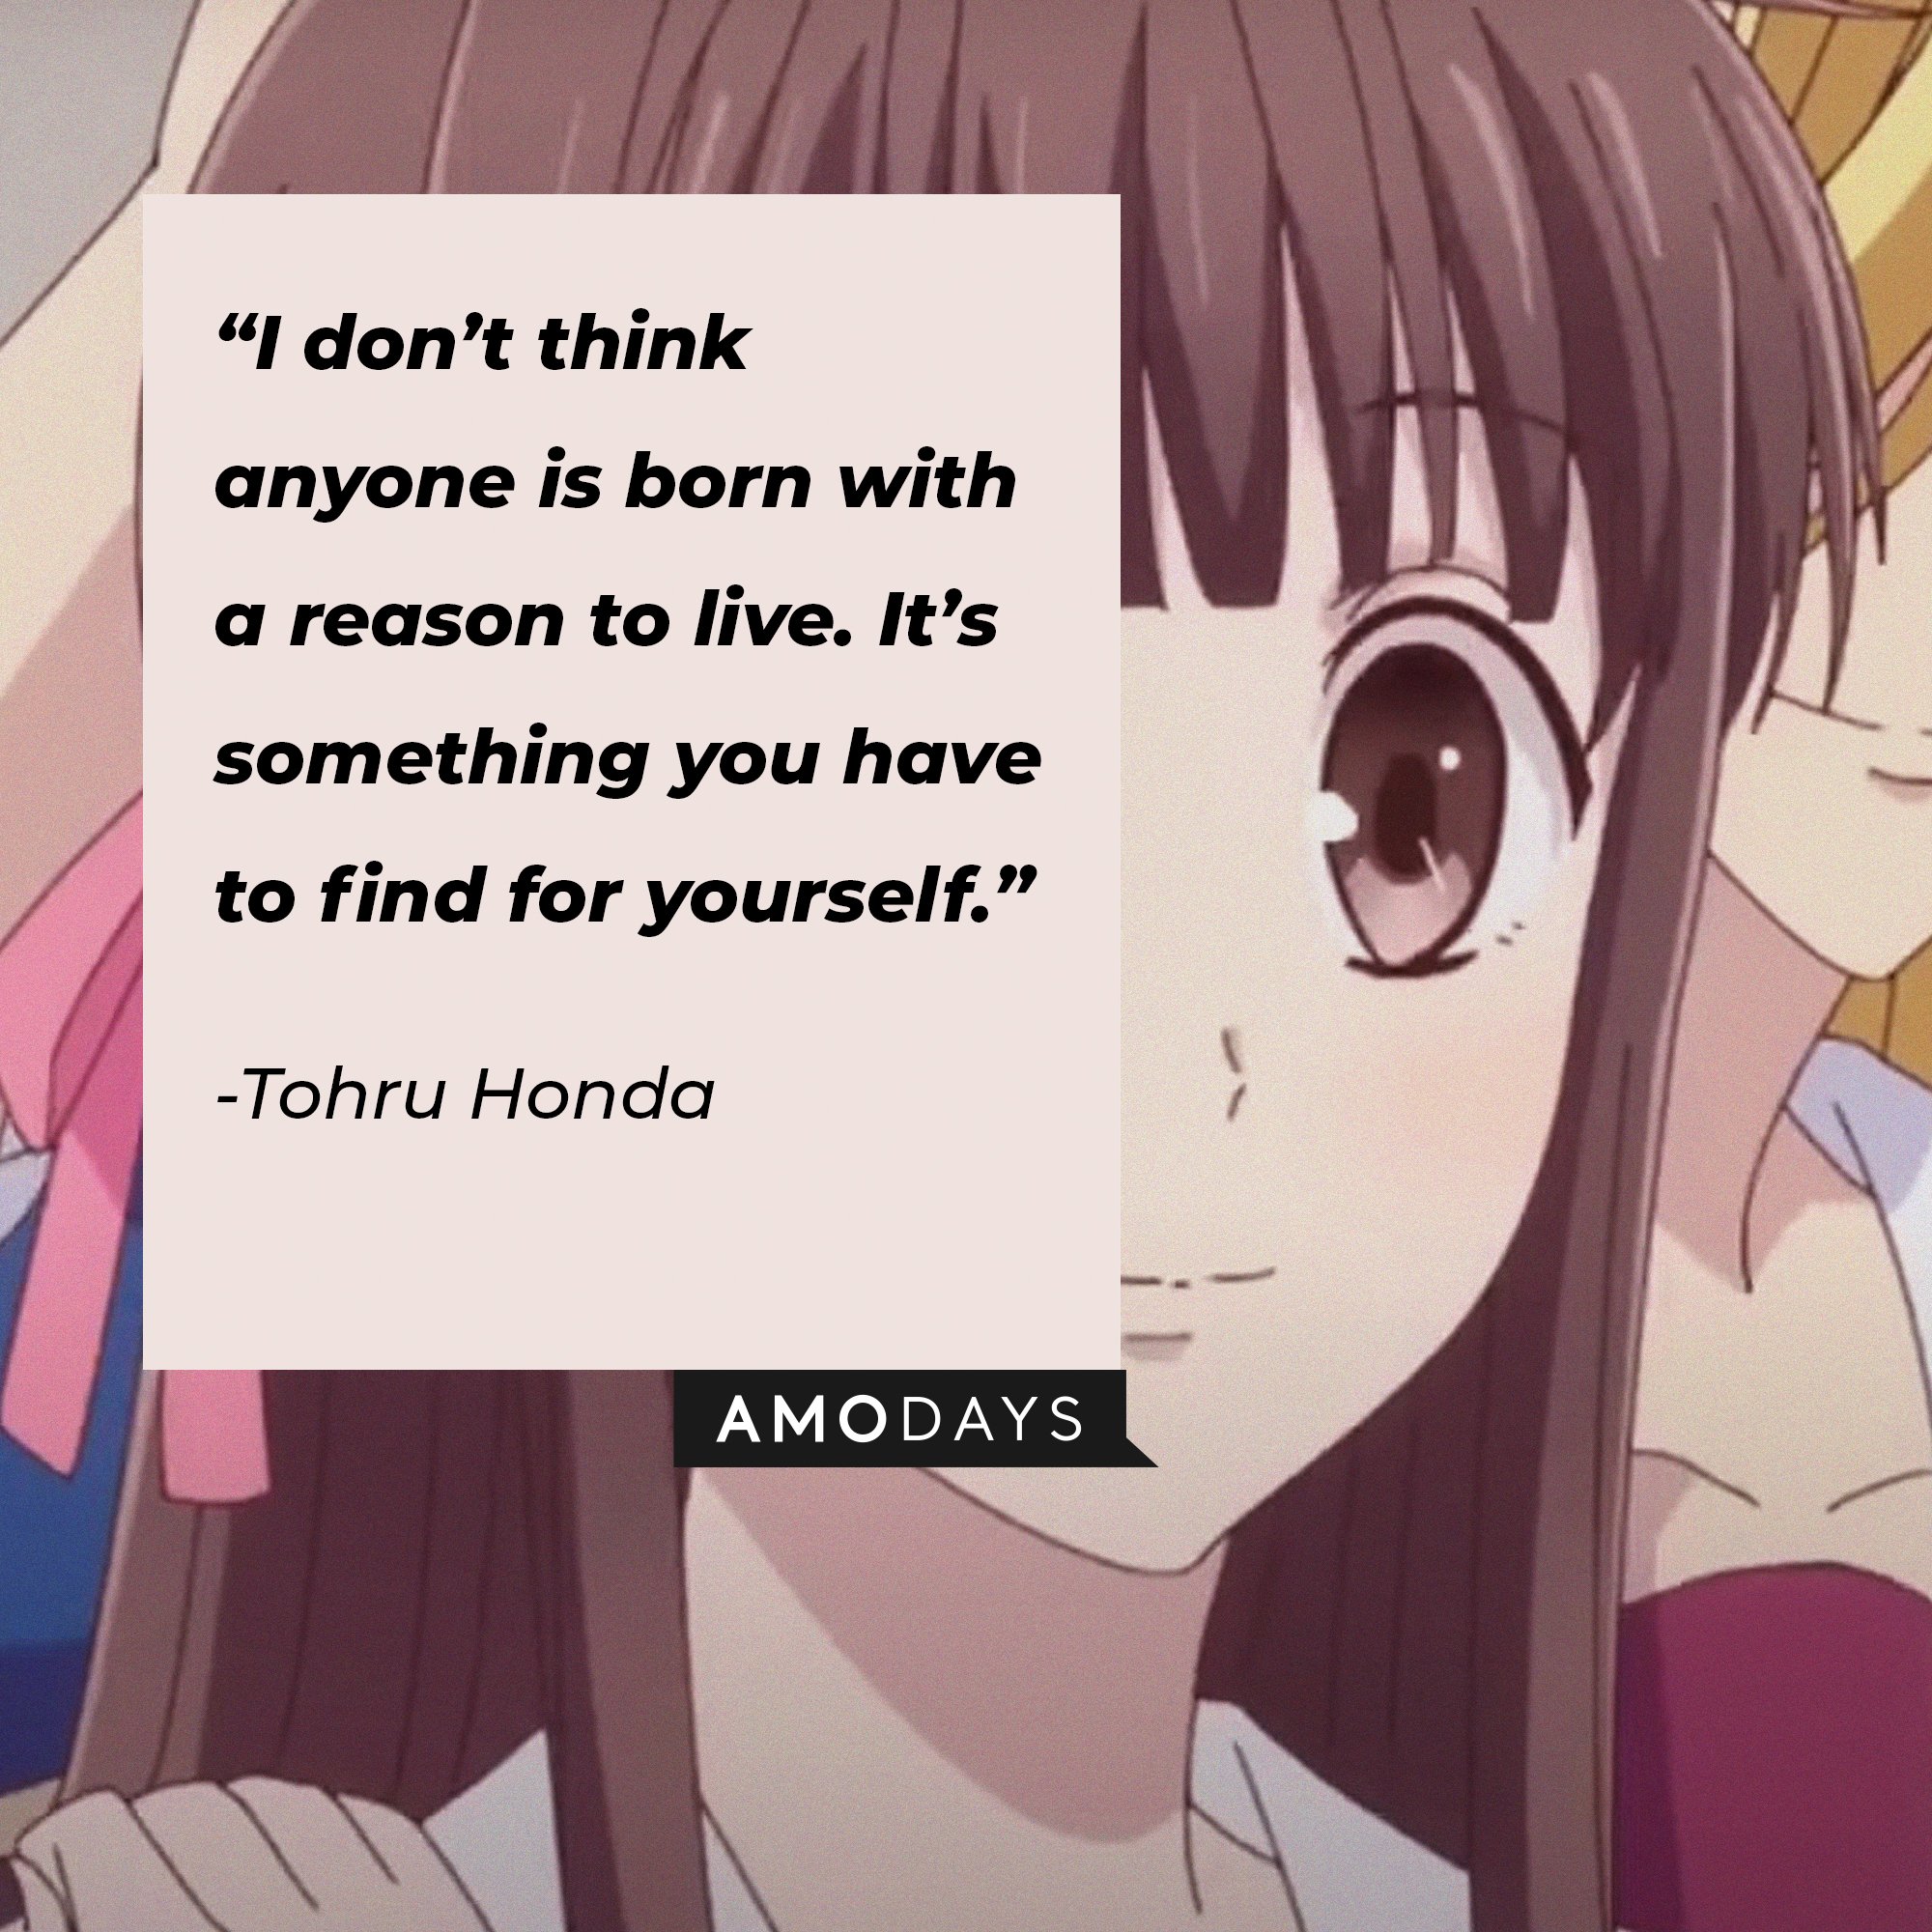  Tohru Honda’s quote: "I don't think anyone is born with a reason to live. It’s something you have to find for yourself.” | Image: AmoDays